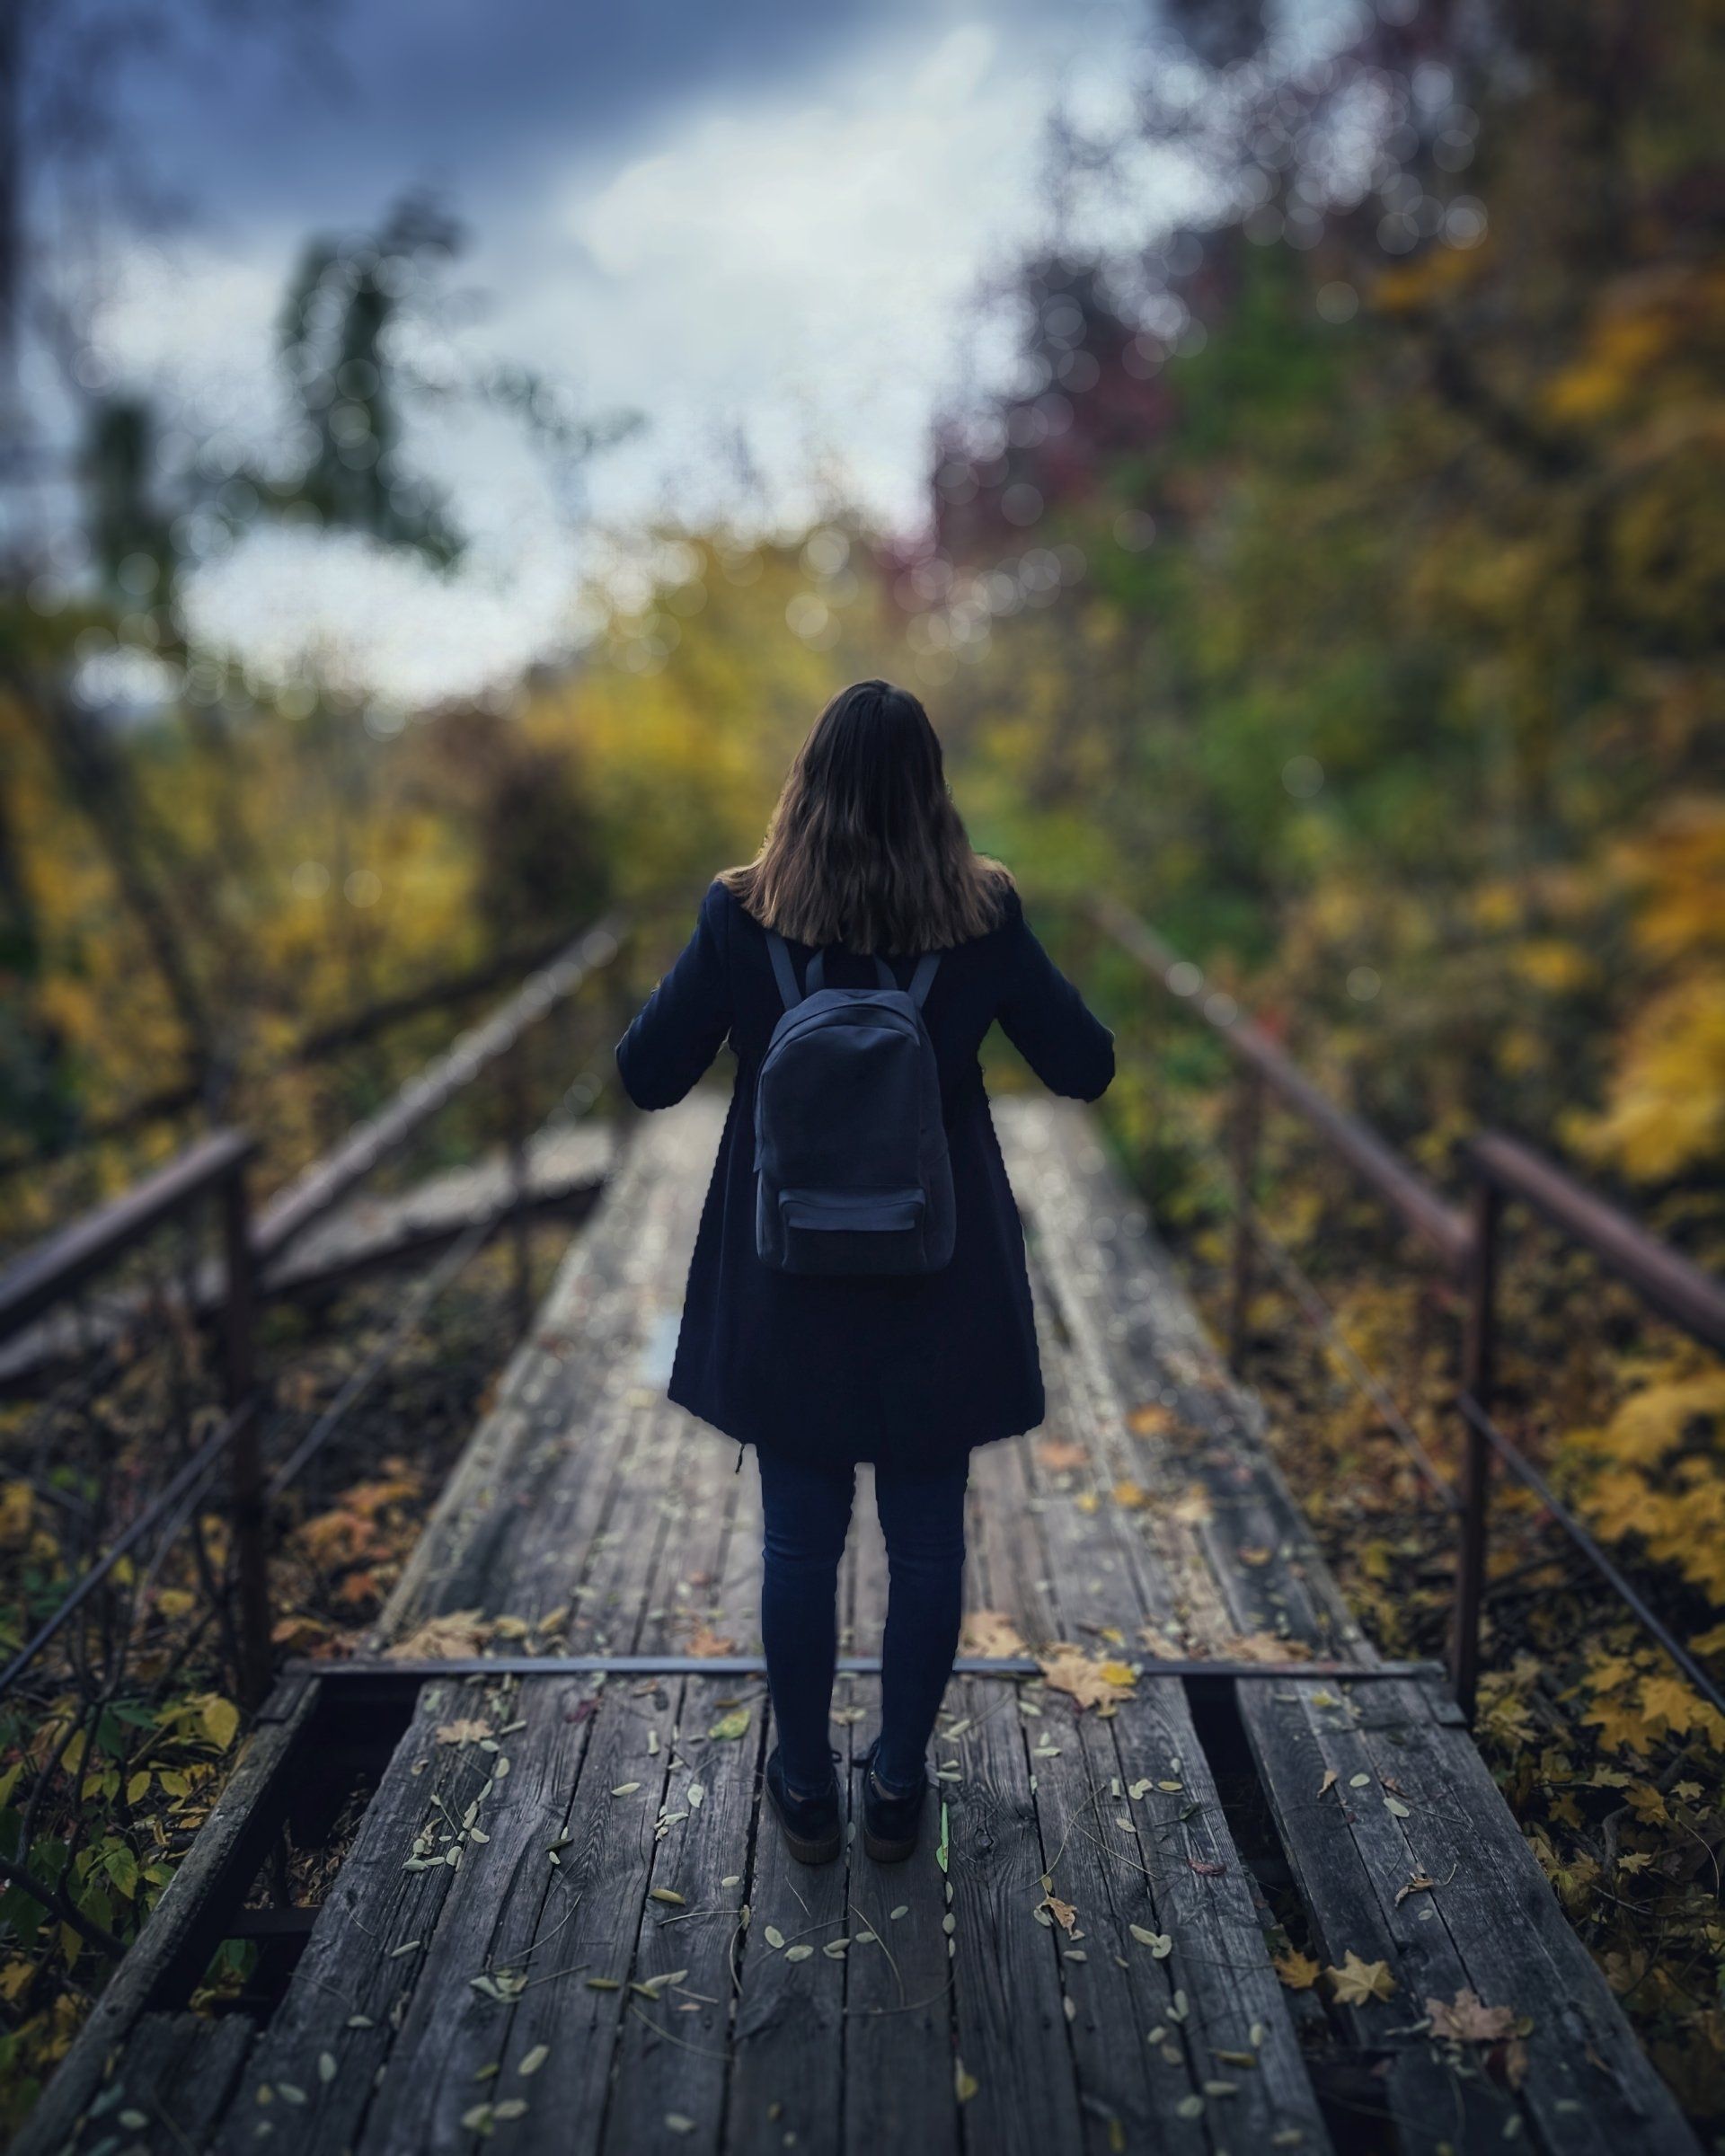 A woman with a backpack is walking across a wooden bridge.